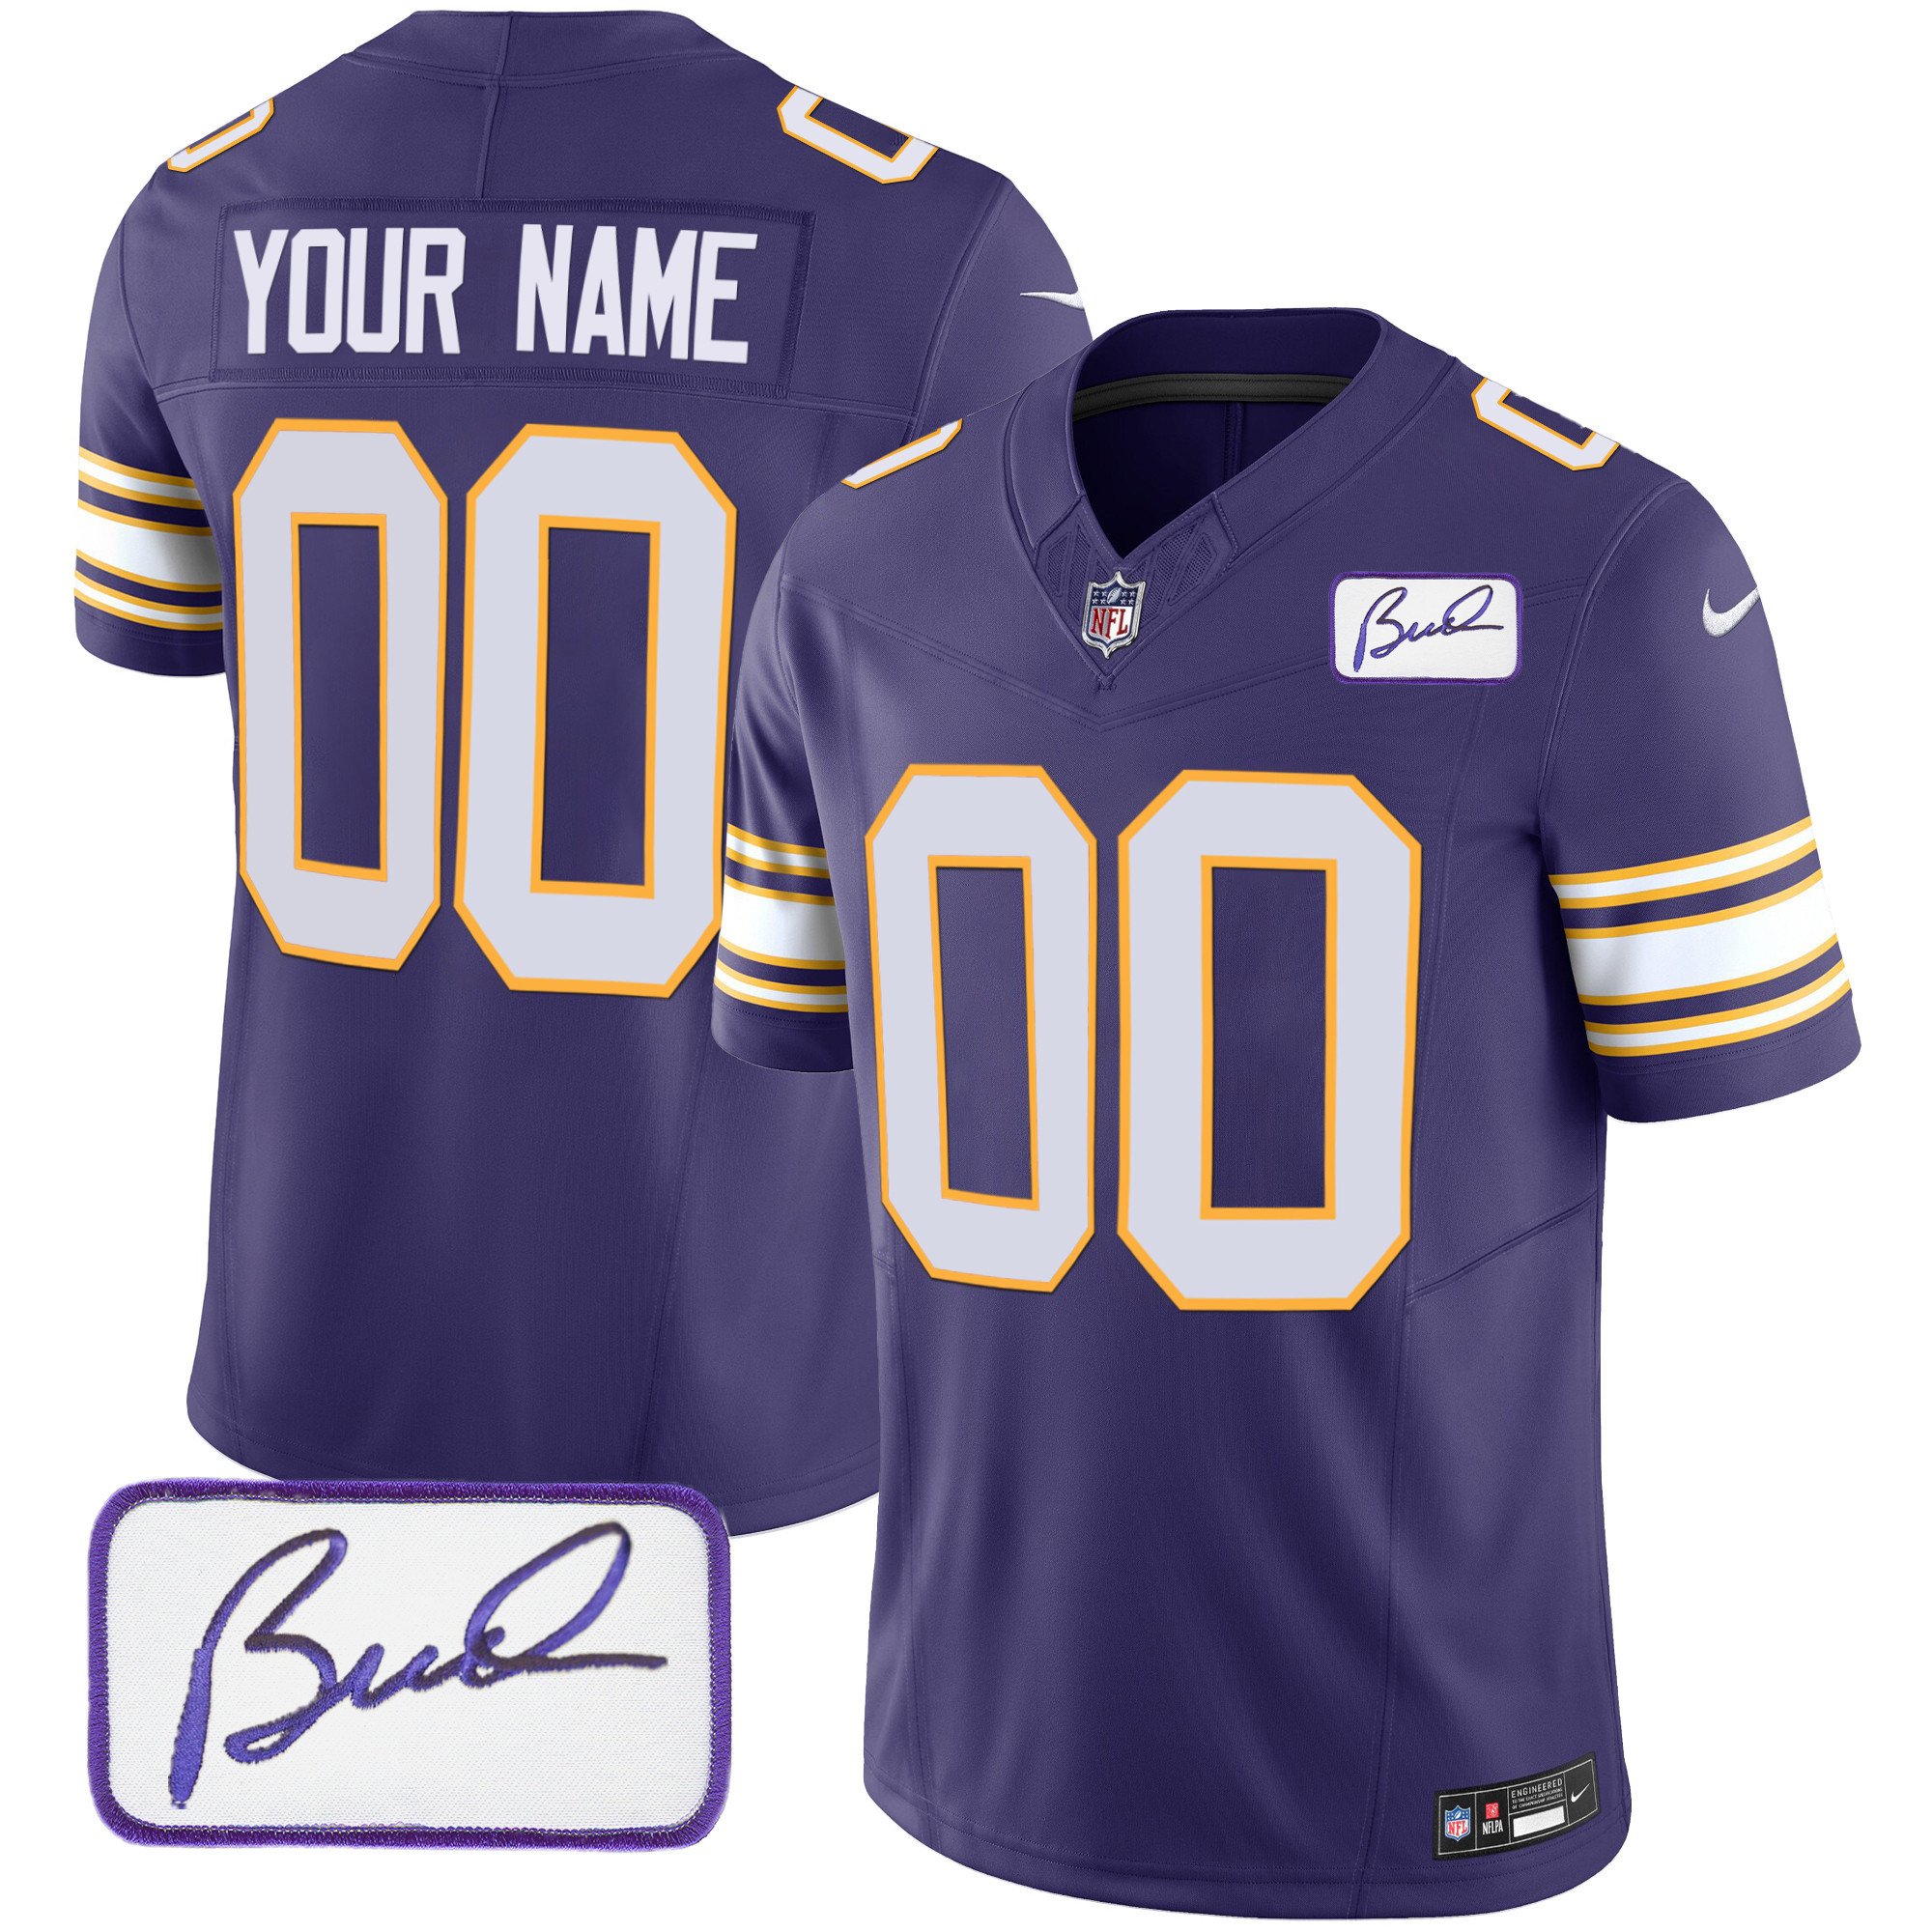 Vikings Bud Grant Patch Classic Limited Custom Jersey - All